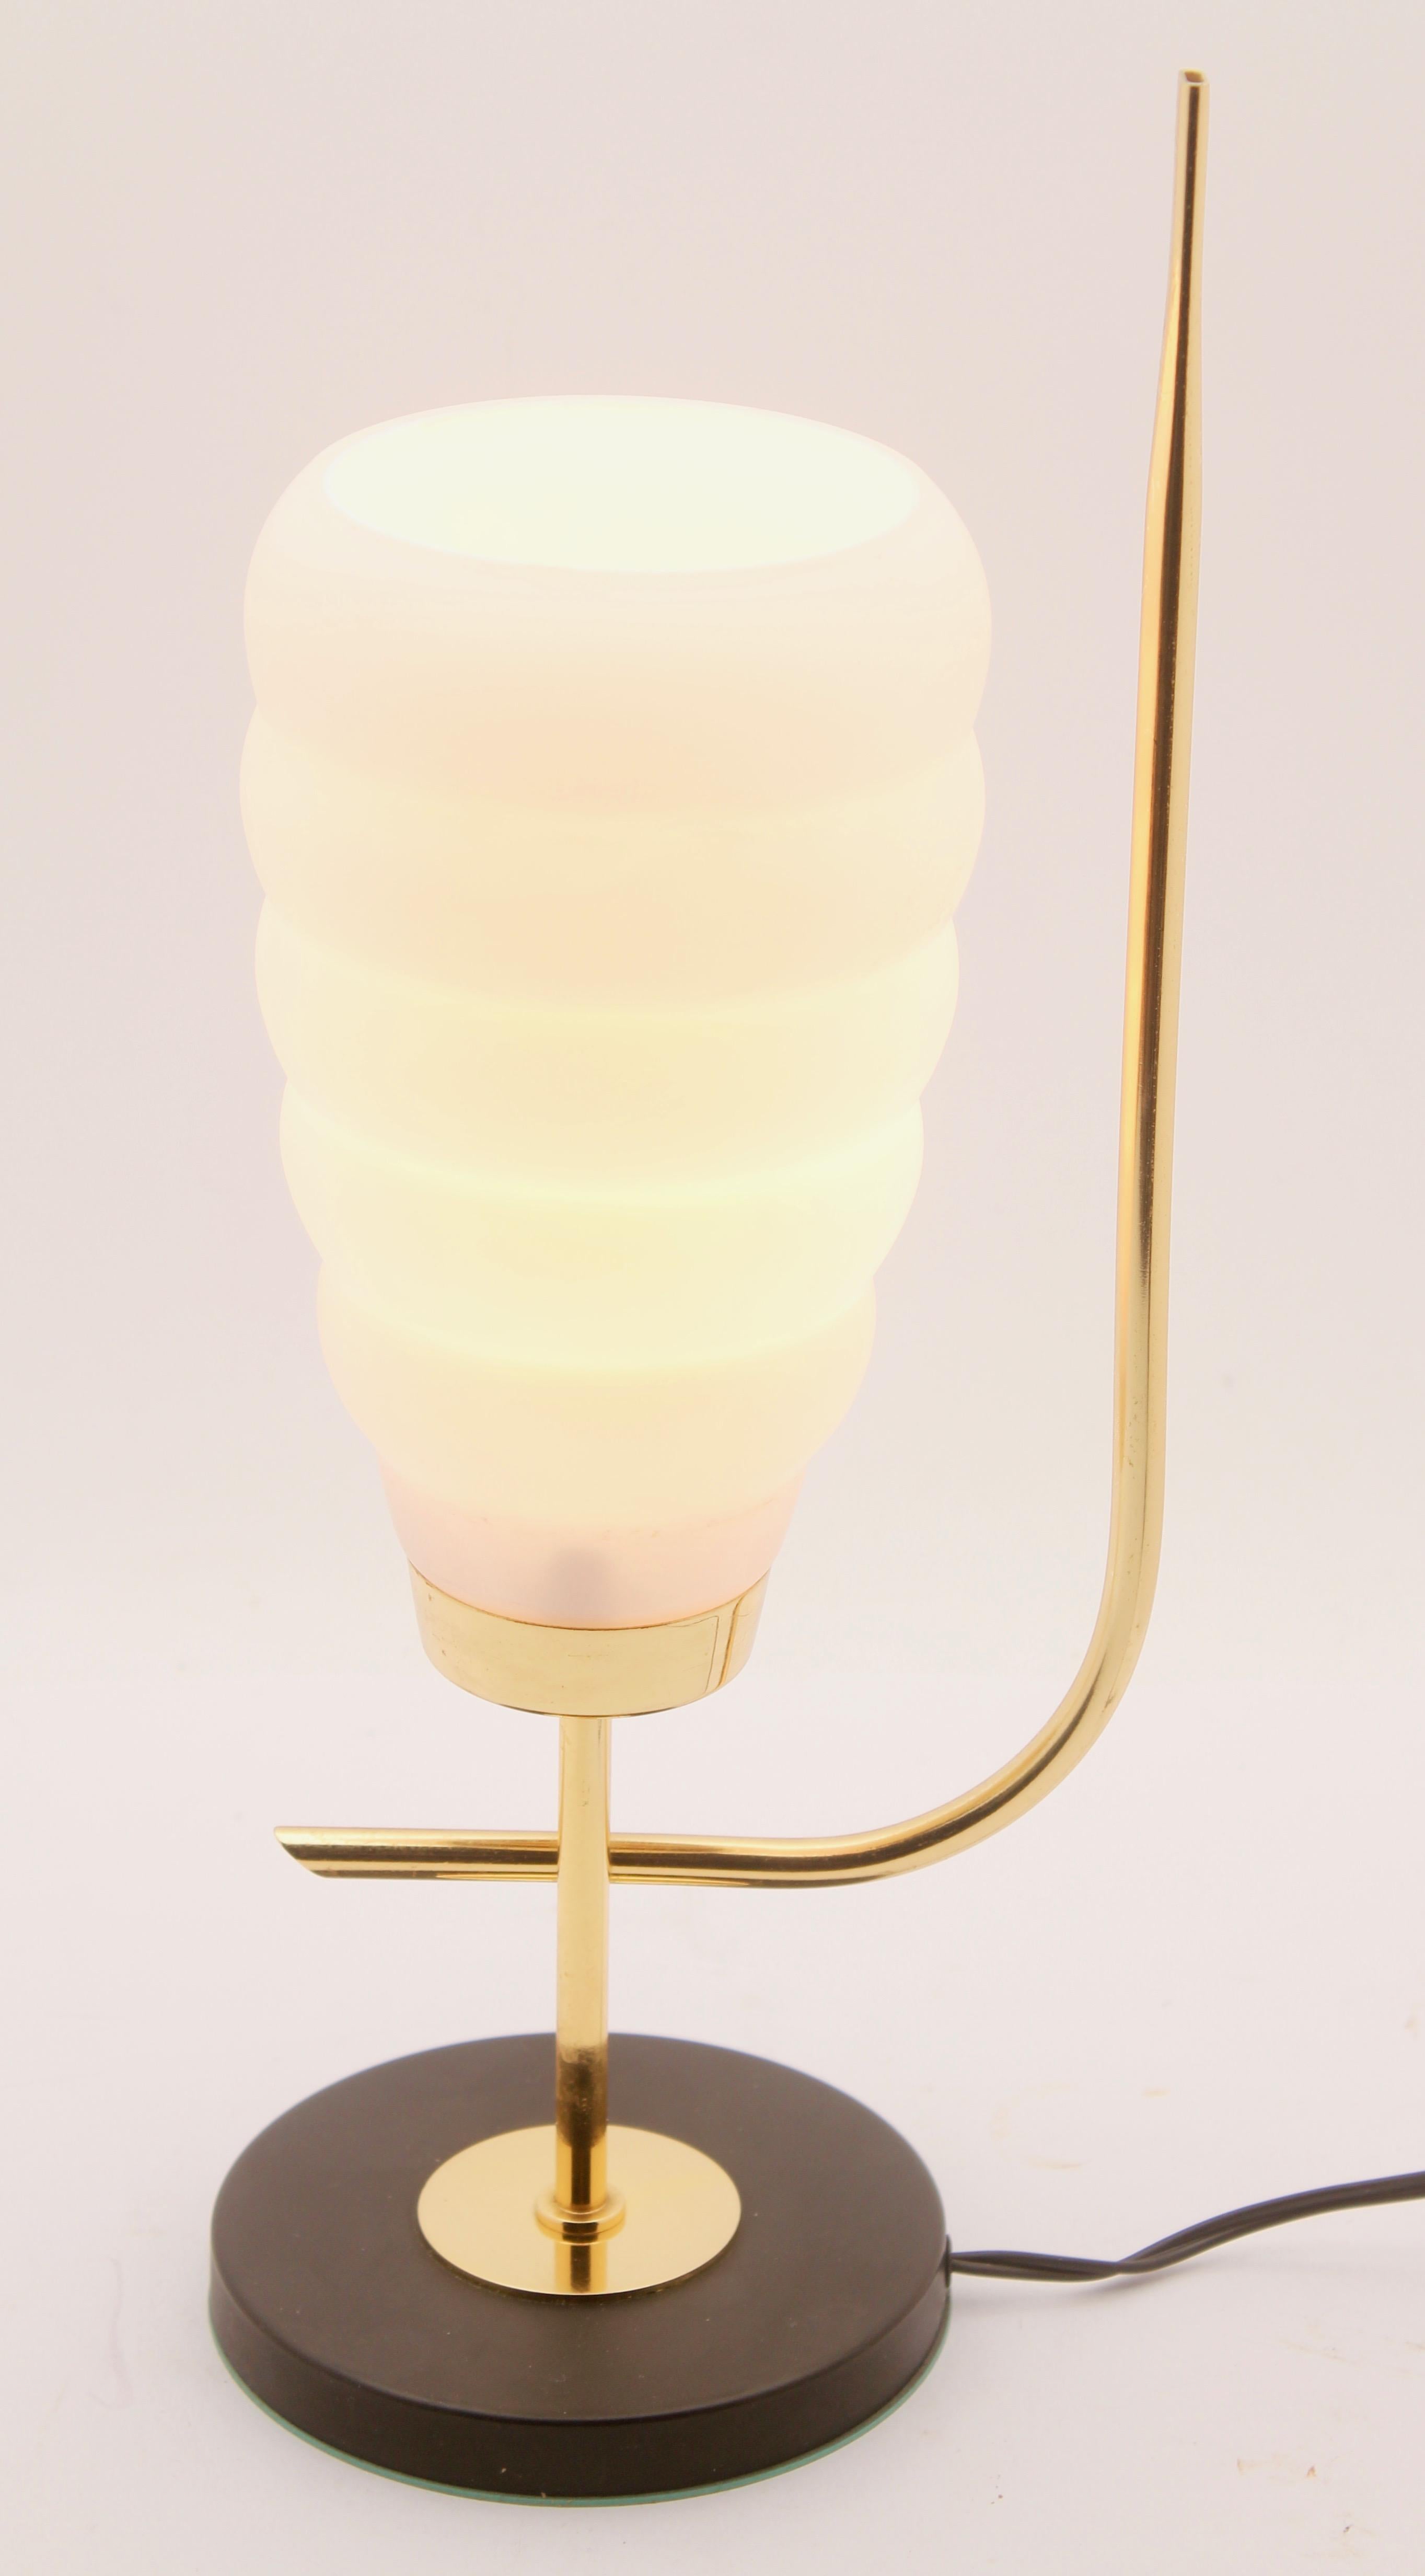 Art Deco Scandinavian Design Table Lamp with Milk-White Glass Shade and Brass Mounts